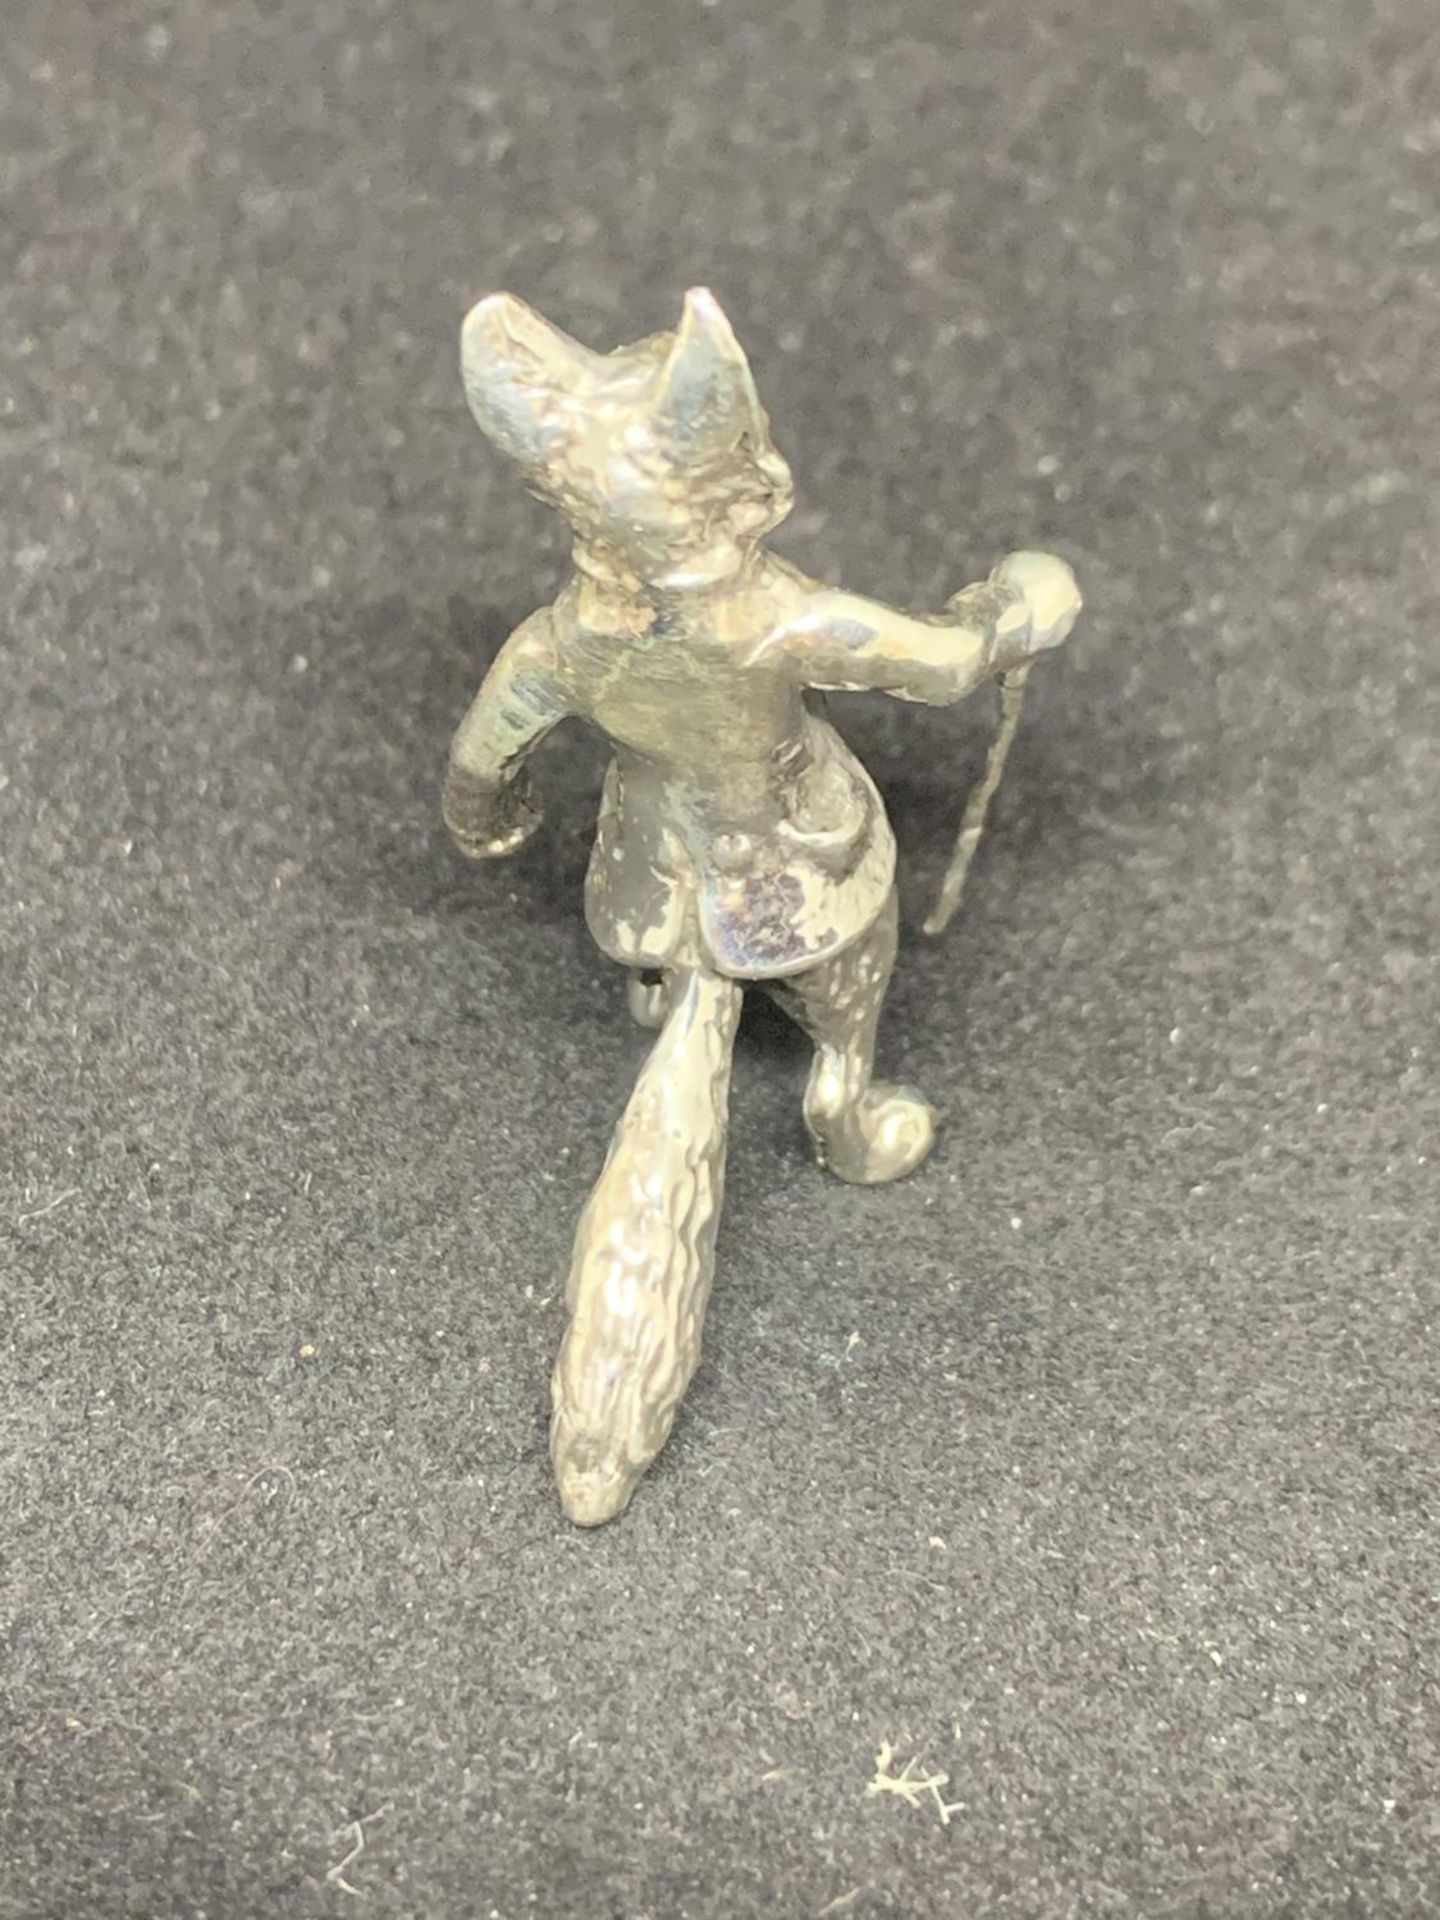 A MINIATURE SILVER STANDING FOX WITH CANE - Image 3 of 4